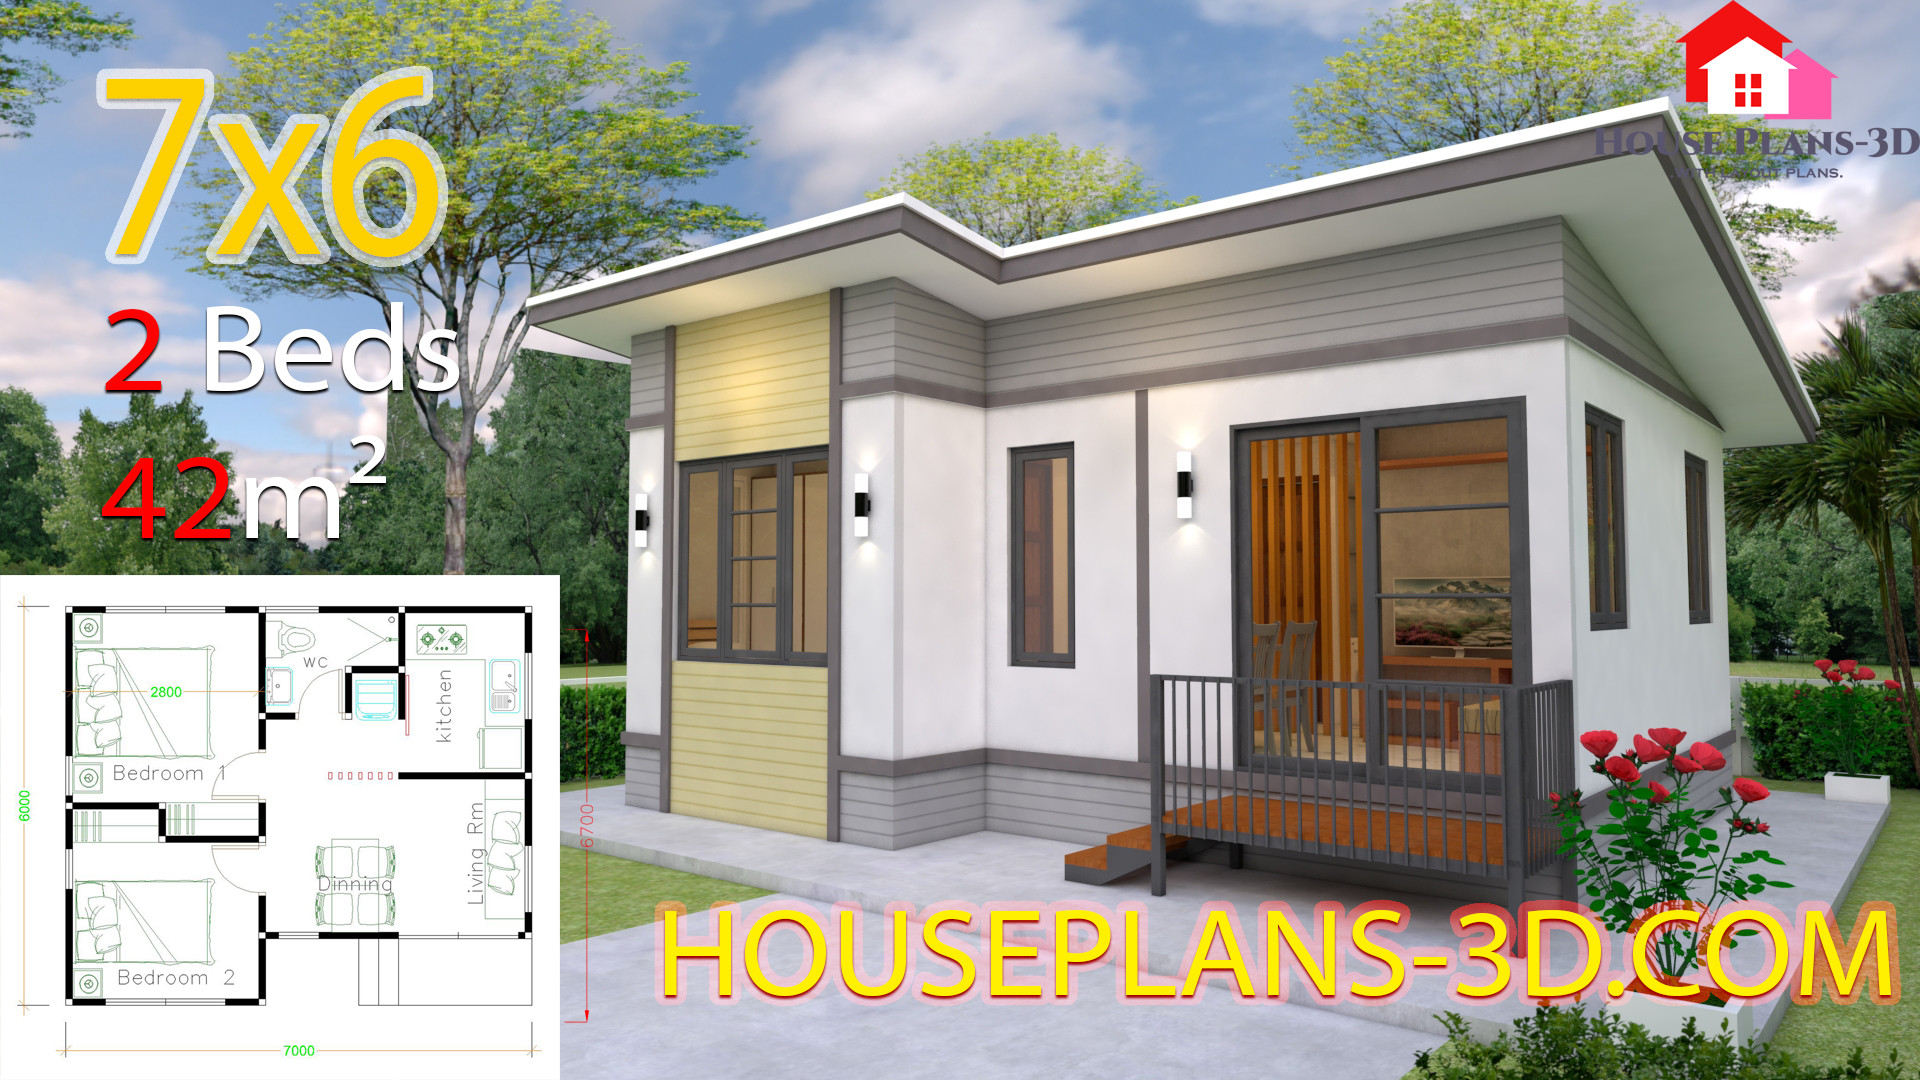 Small 2 Bedroom House
 Small House plans 7x6 with 2 Bedrooms House Plans 3D